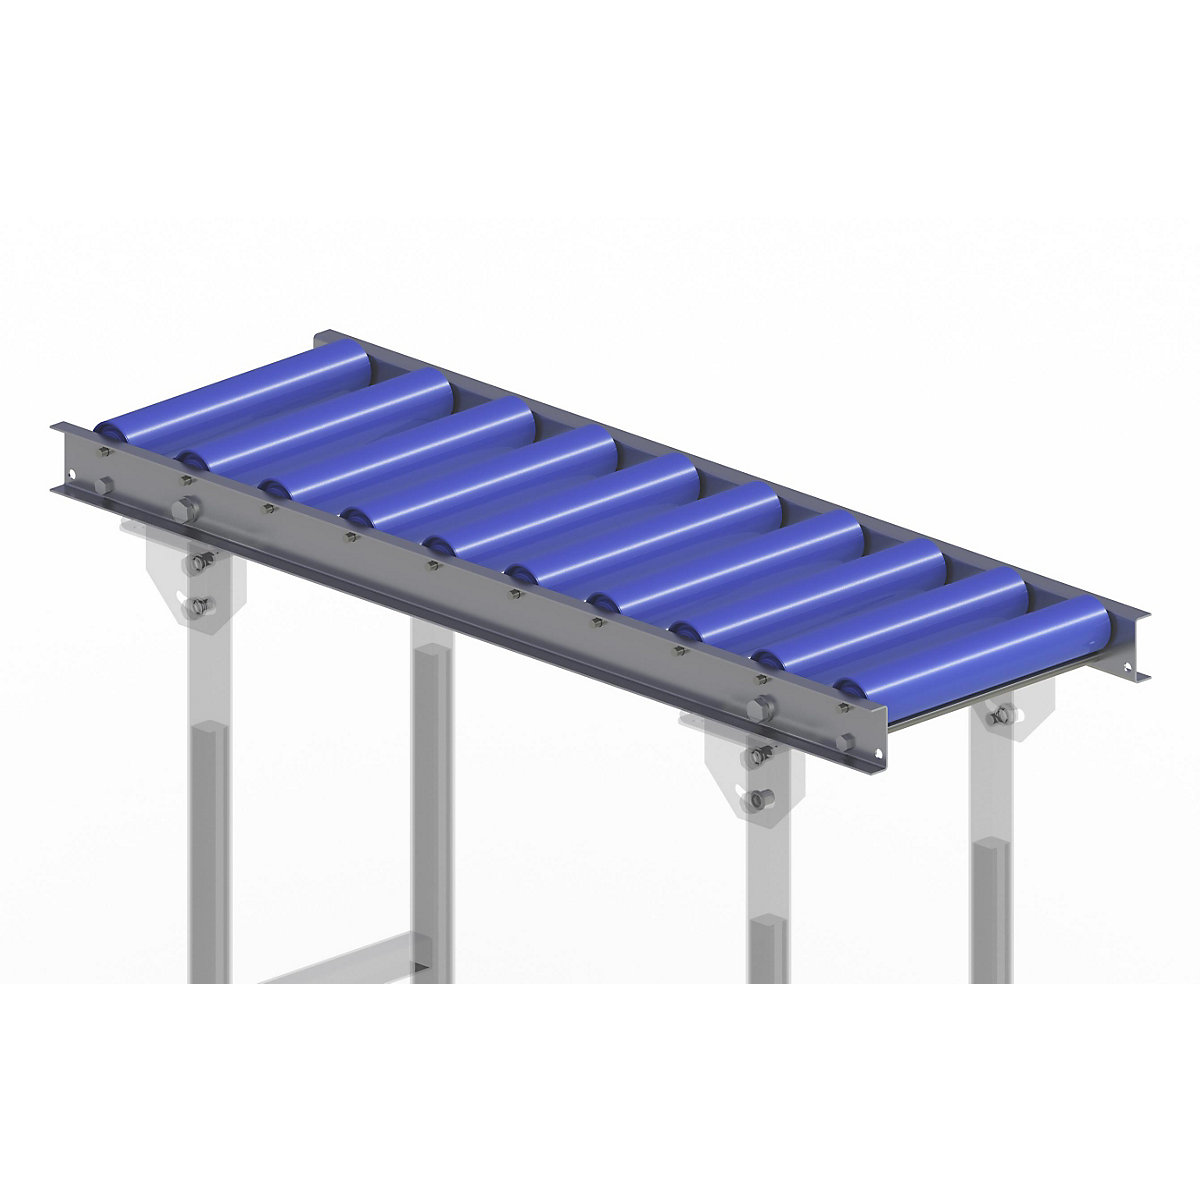 WNS Heavy Duty Roller Conveyor Table 2 Metre Holds 400Kg 7 Rollers Adjustable 